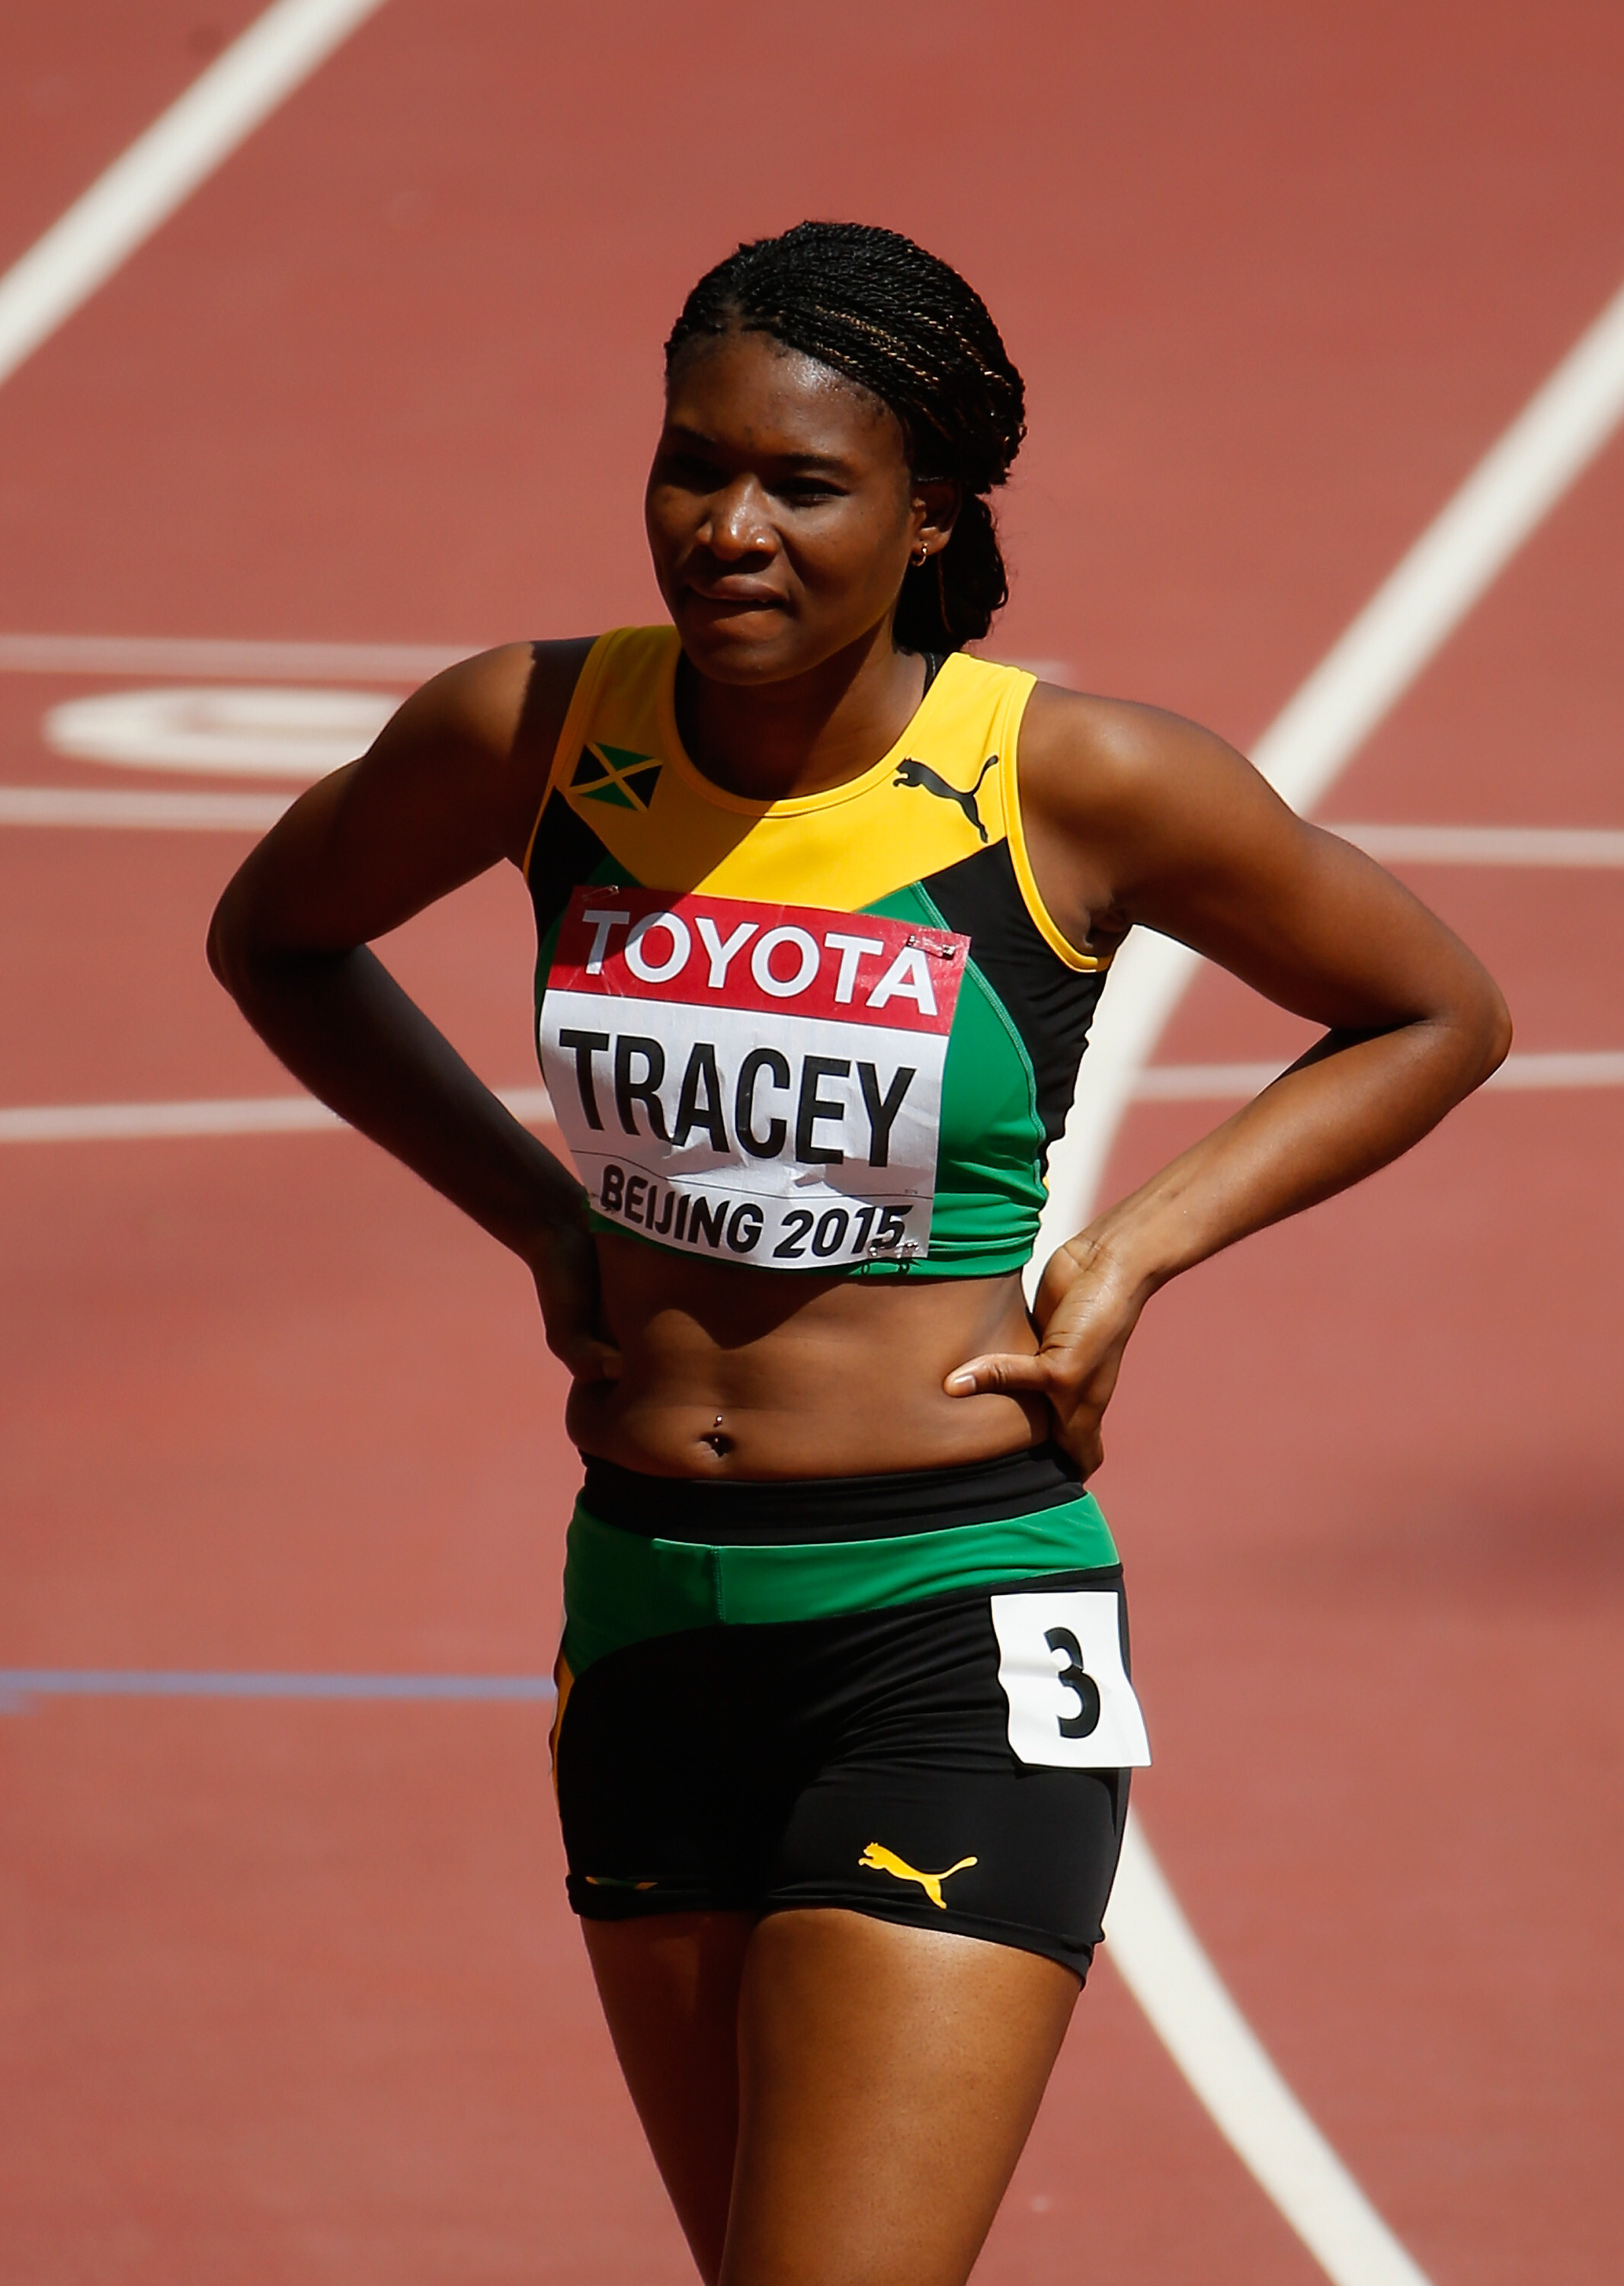 Ristananna Tracey, Olympic hurdler, Record-breaking athlete, Fierce competitor, 2140x3000 HD Handy